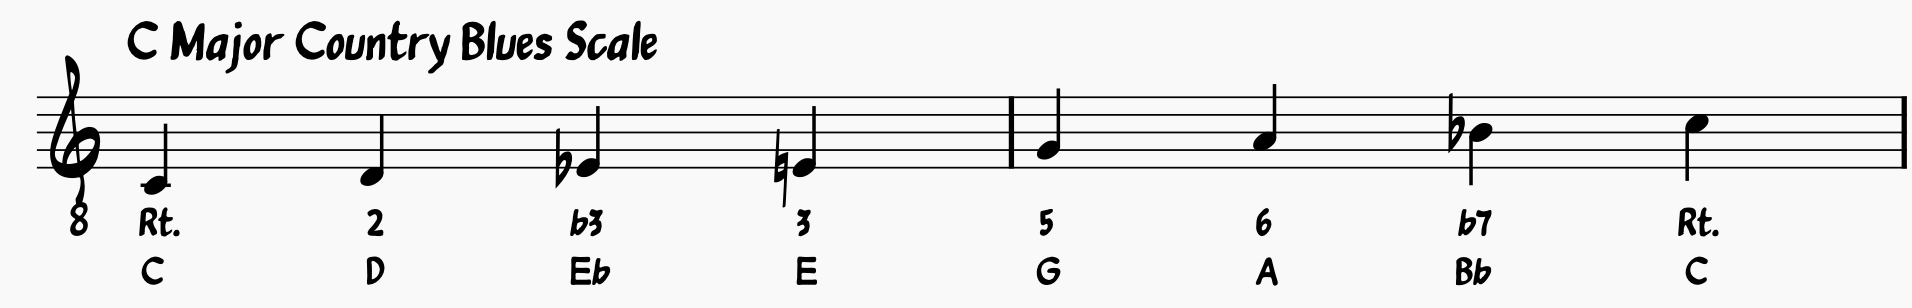 Blues Scale Guide: C Major Country Blues Scale